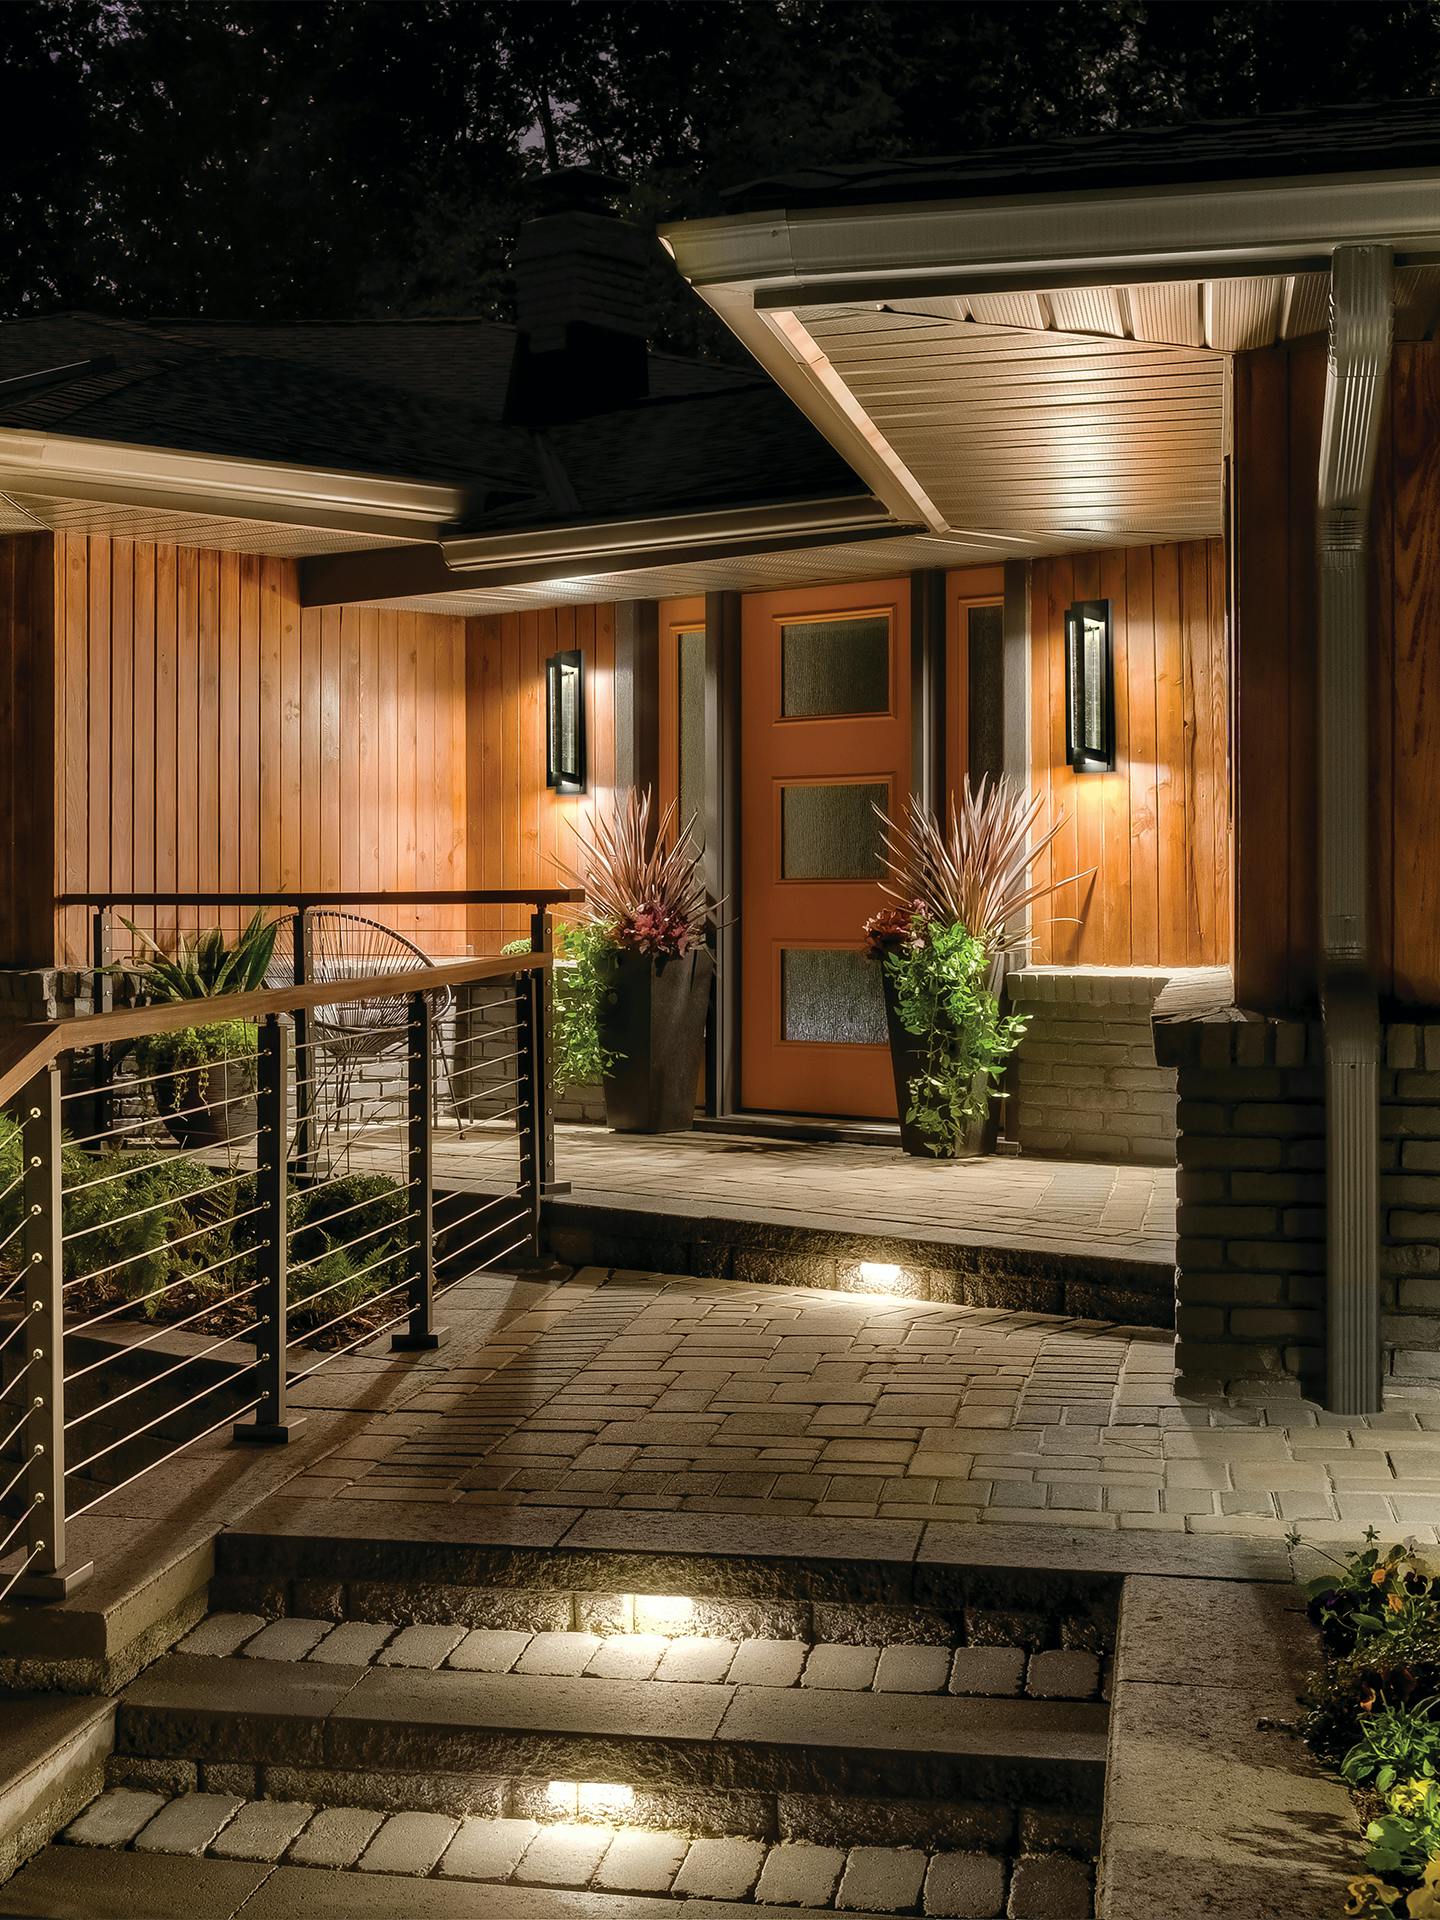 Outdoor entryway at night with River path lights